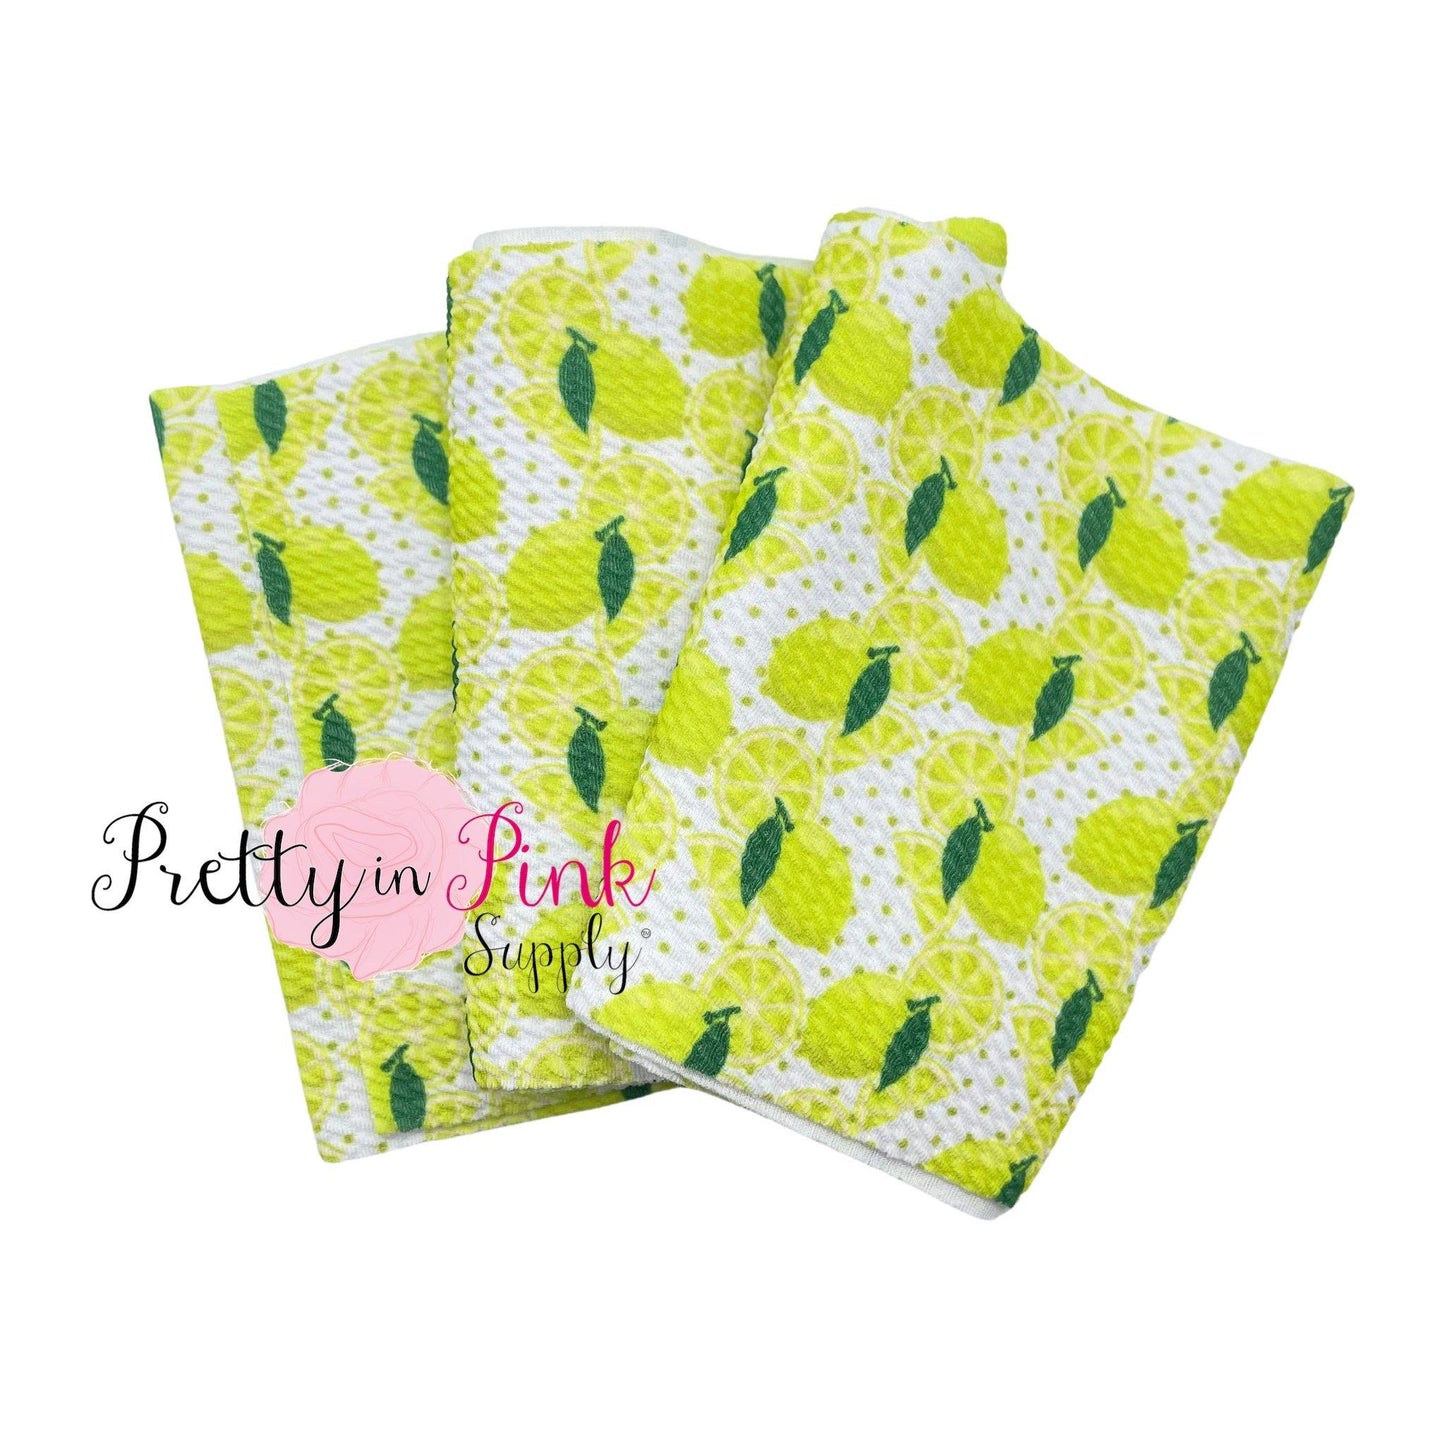 Sweet n' Sour Lemon | Liverpool Stretch Fabric - Pretty in Pink Supply